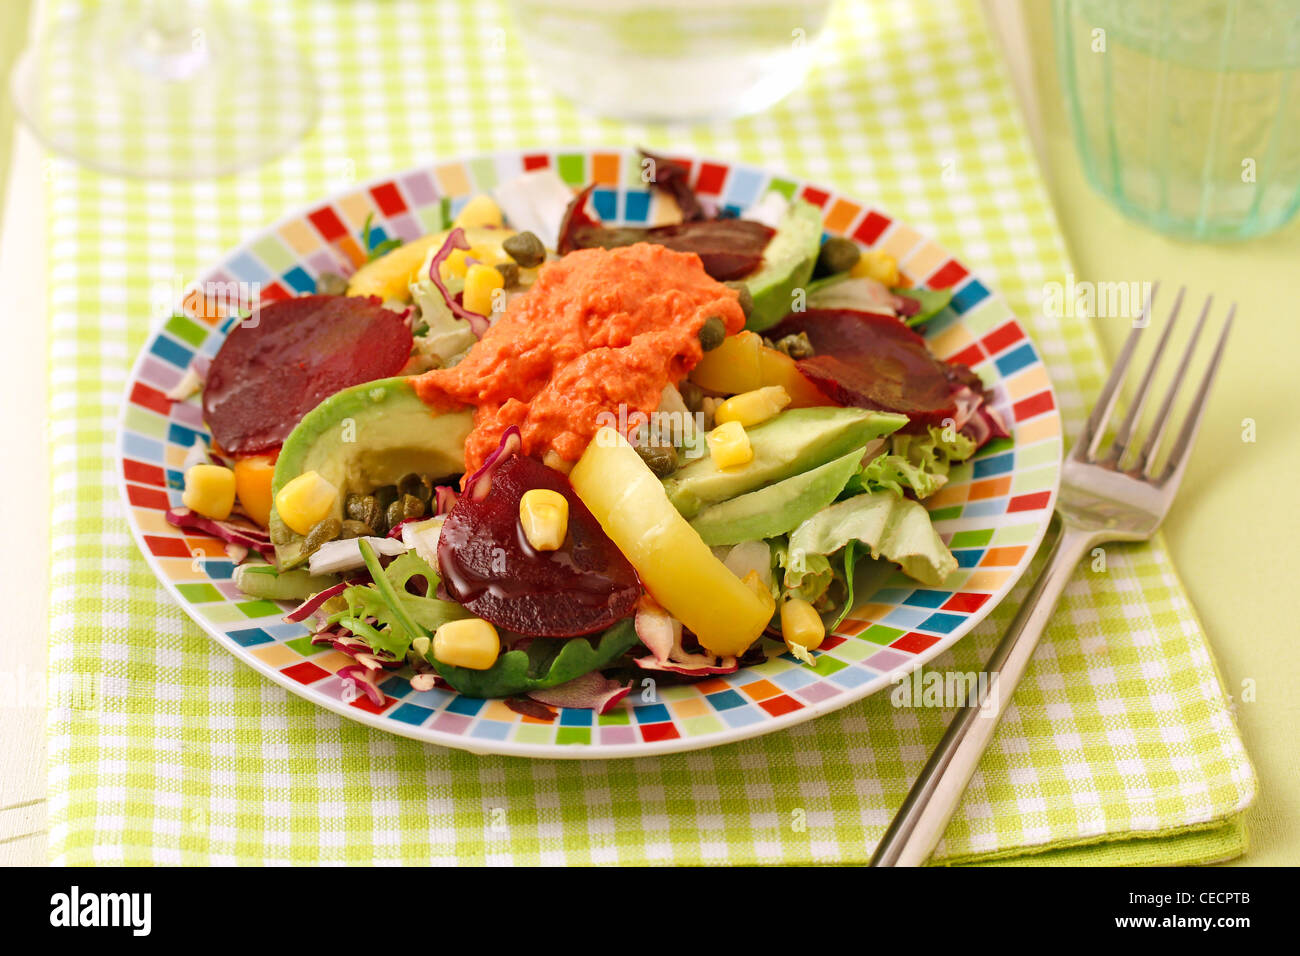 Salad with pepper sauce. Recipe available Stock Photo